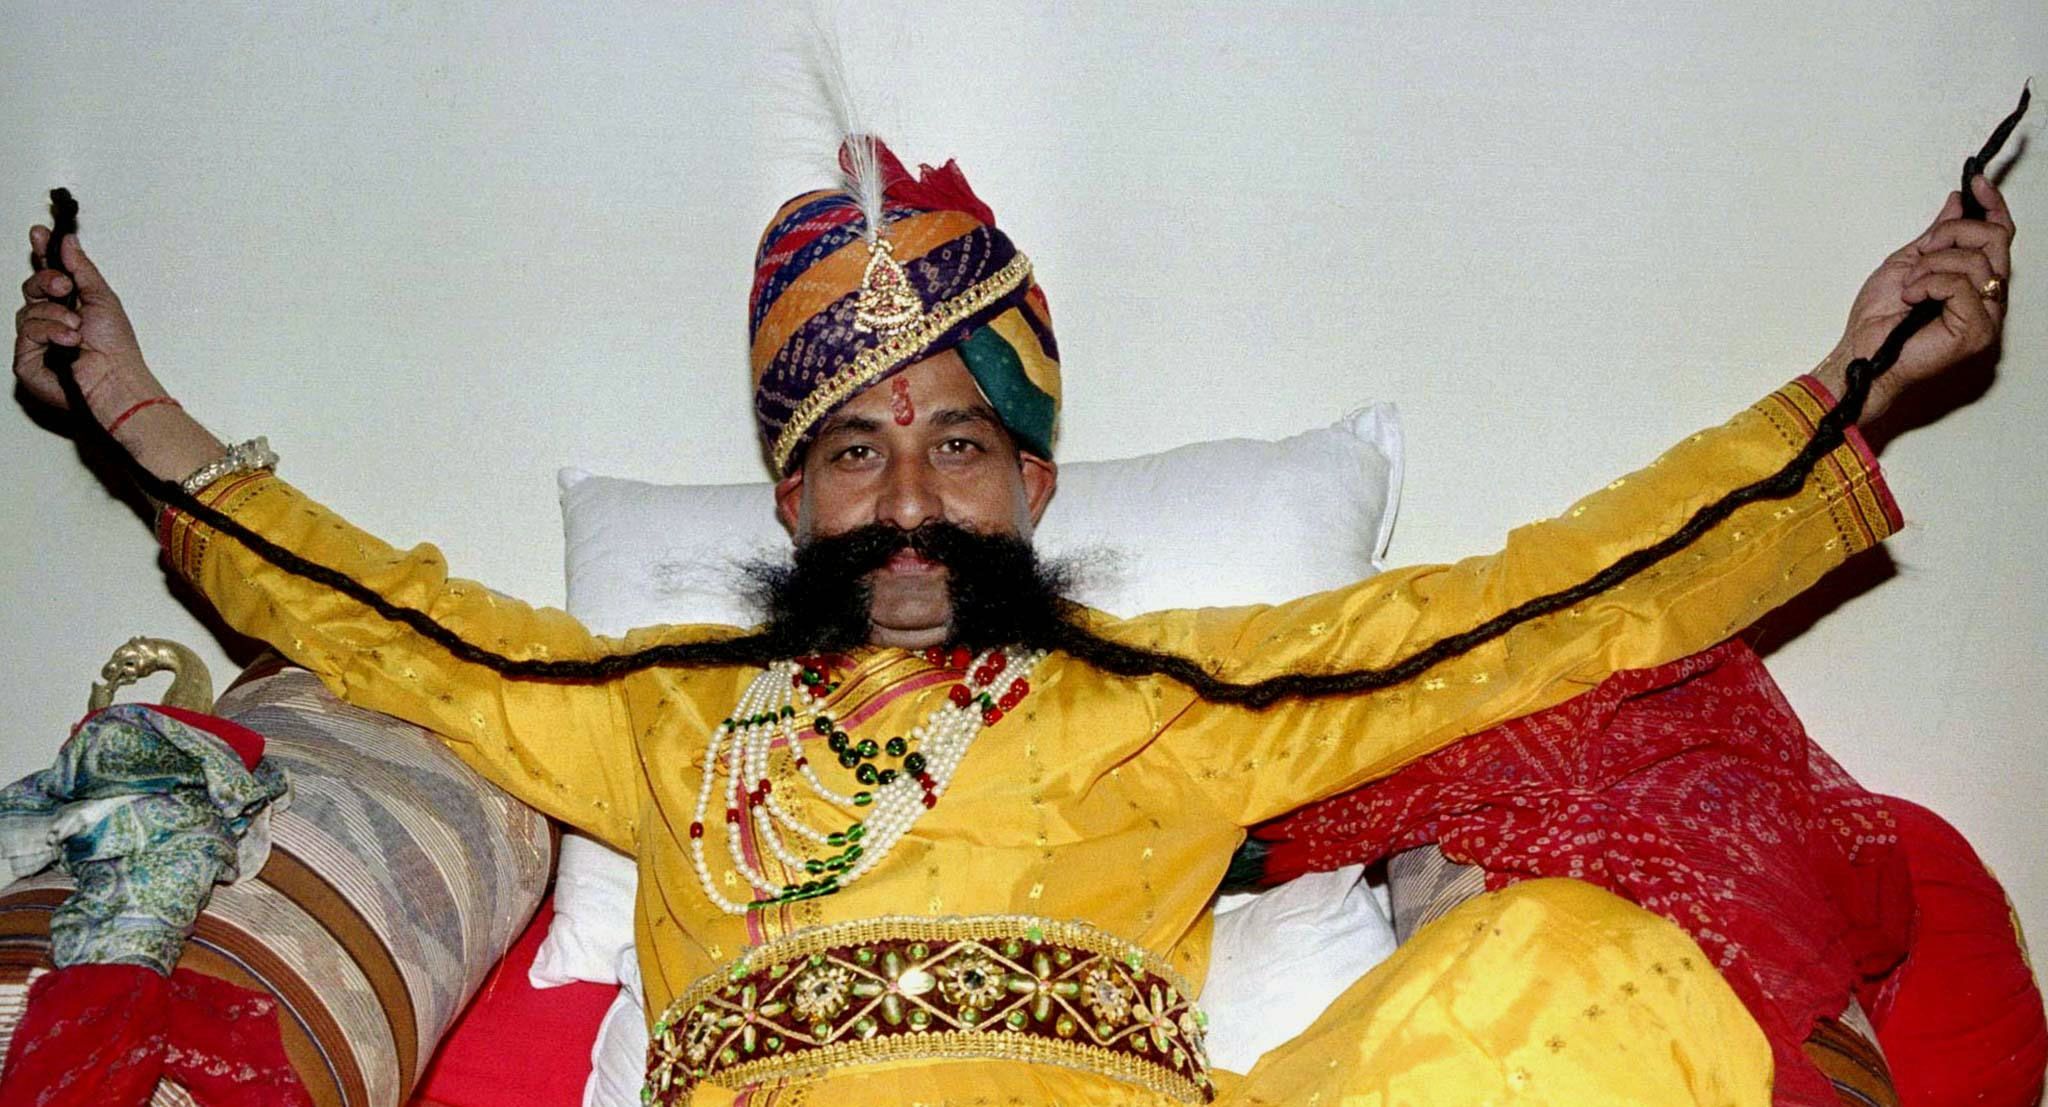 Elendig otte elevation World's Largest Mustache: Ram Singh Chauhan Hasn't Cut His 14-Foot Long  Stache In 32 Years [PHOTOS]